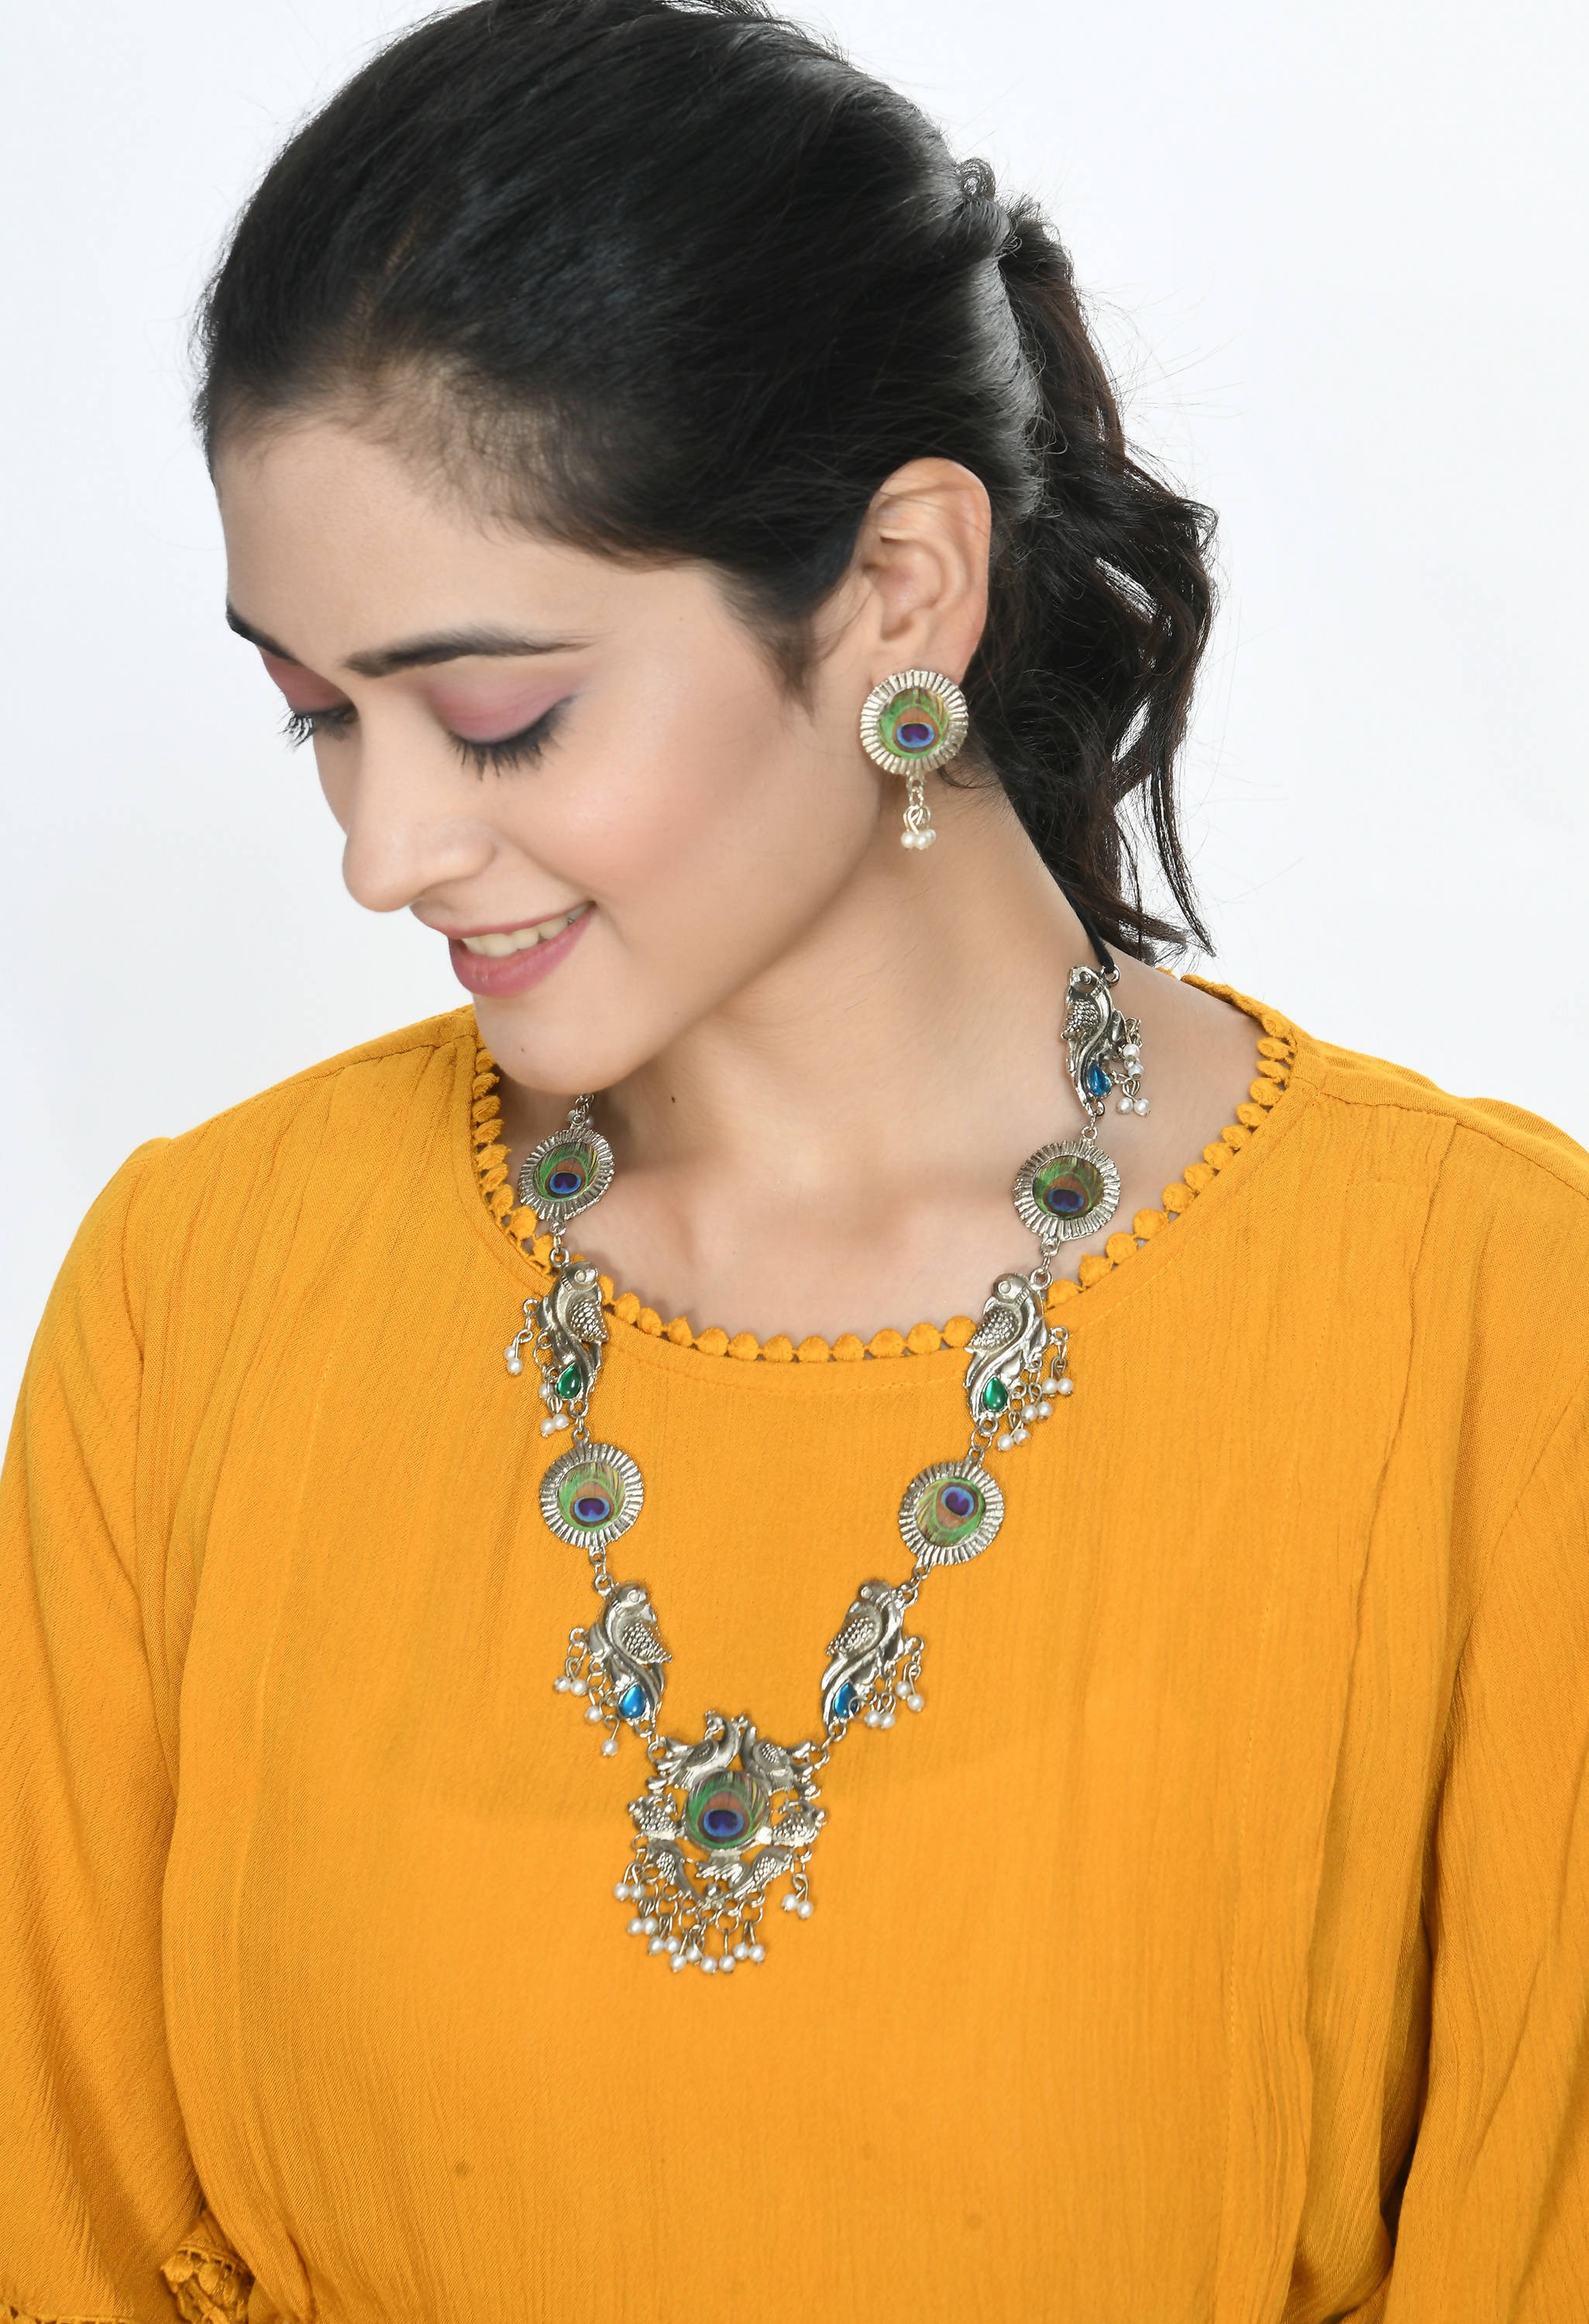 Trendia Treditional Peacock Design Necklace Jkms_058